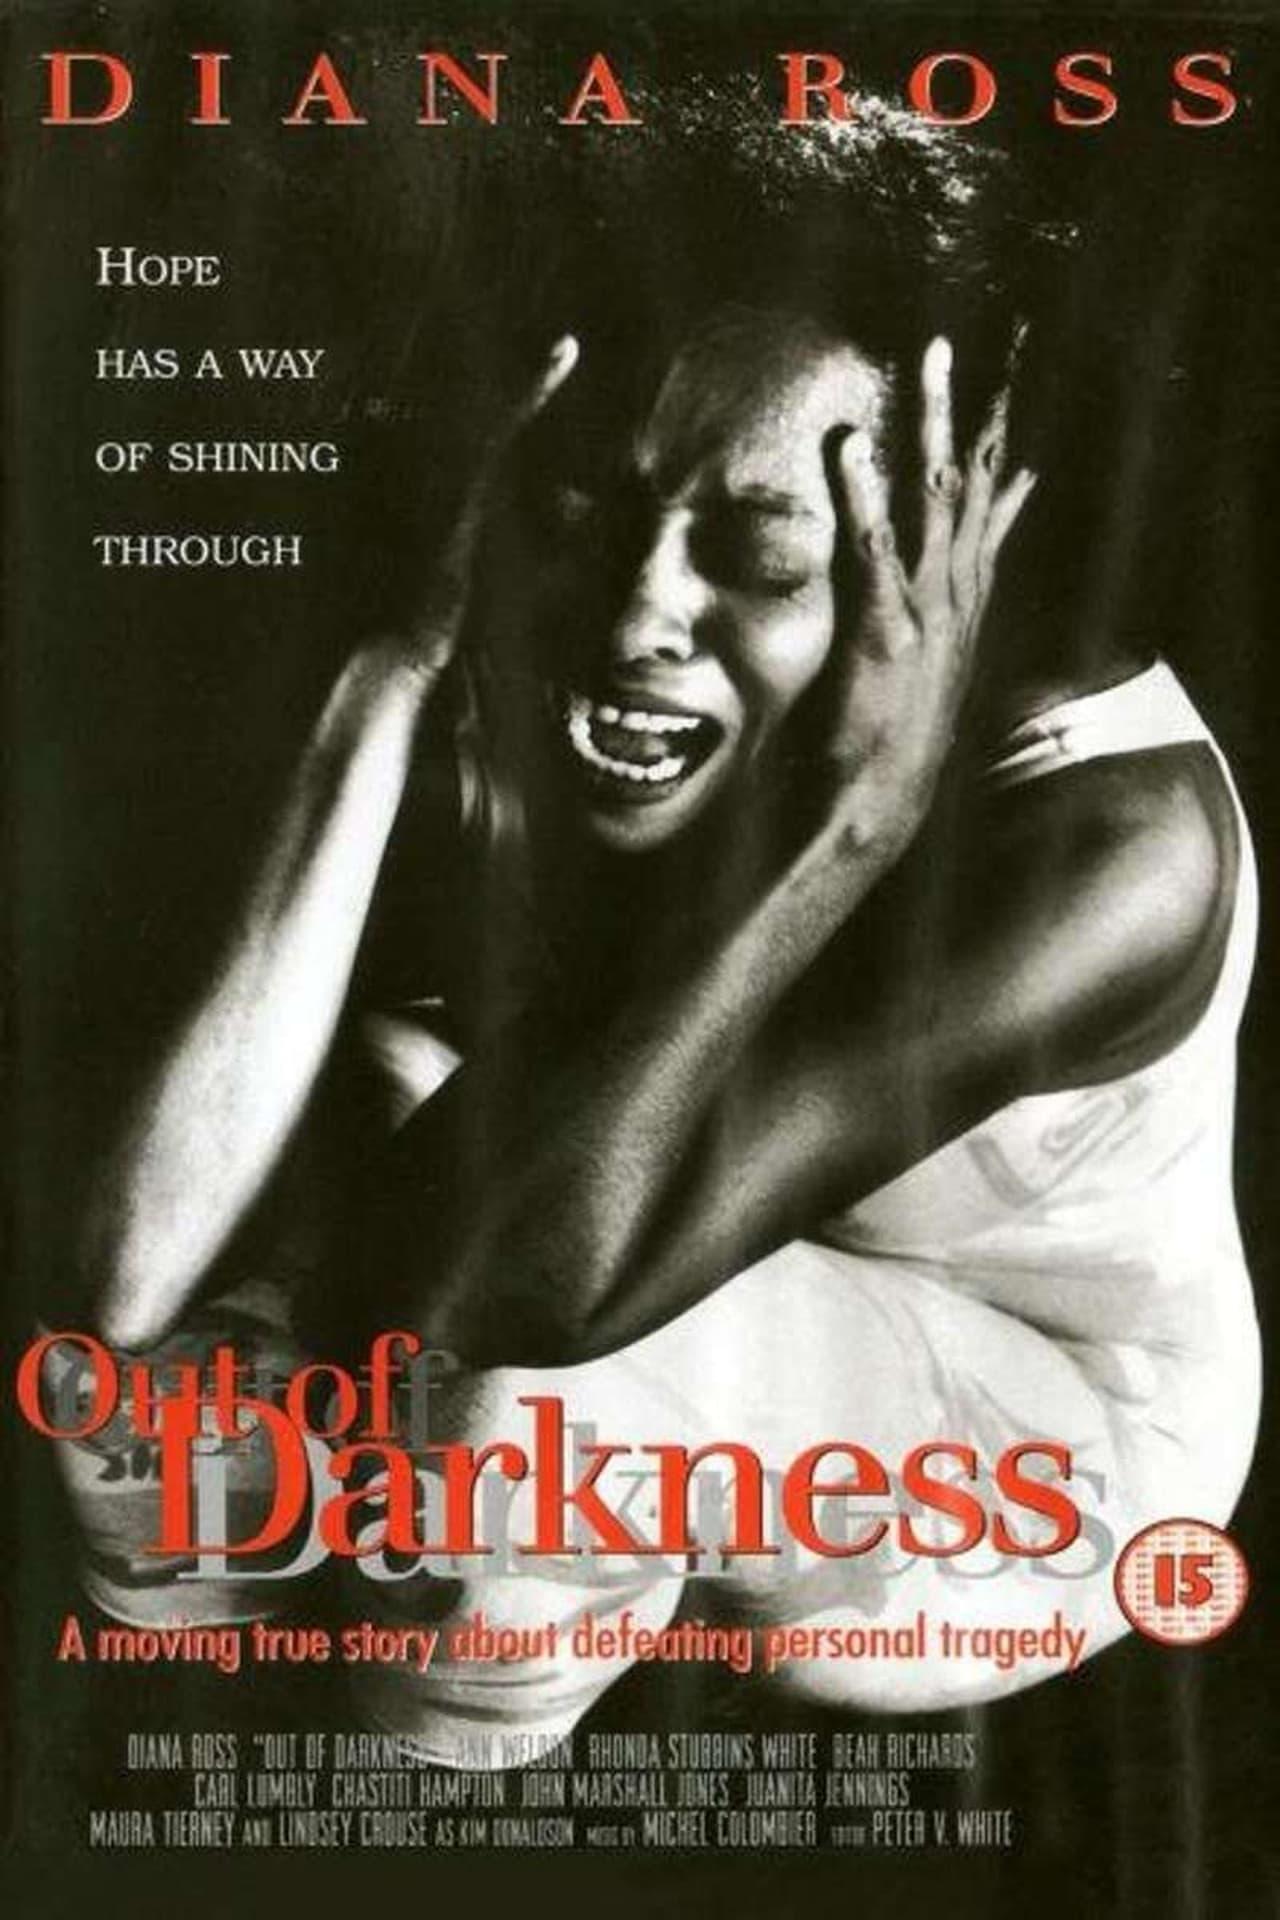 Out of Darkness poster